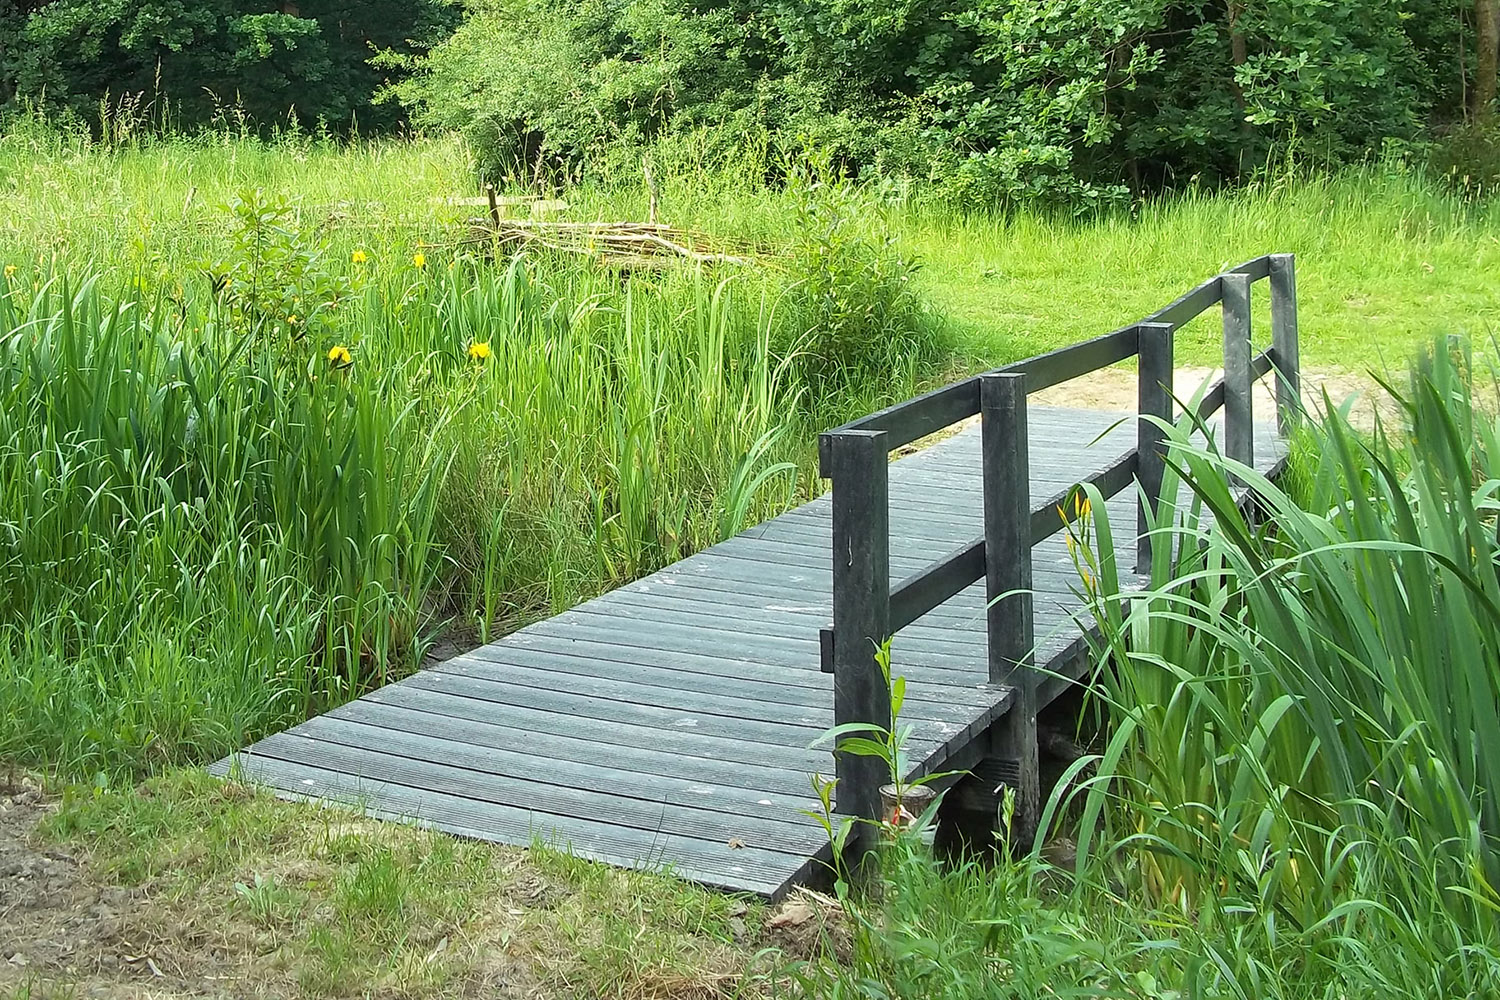 A recycled plastic boardwalk used as a bridge across a stream